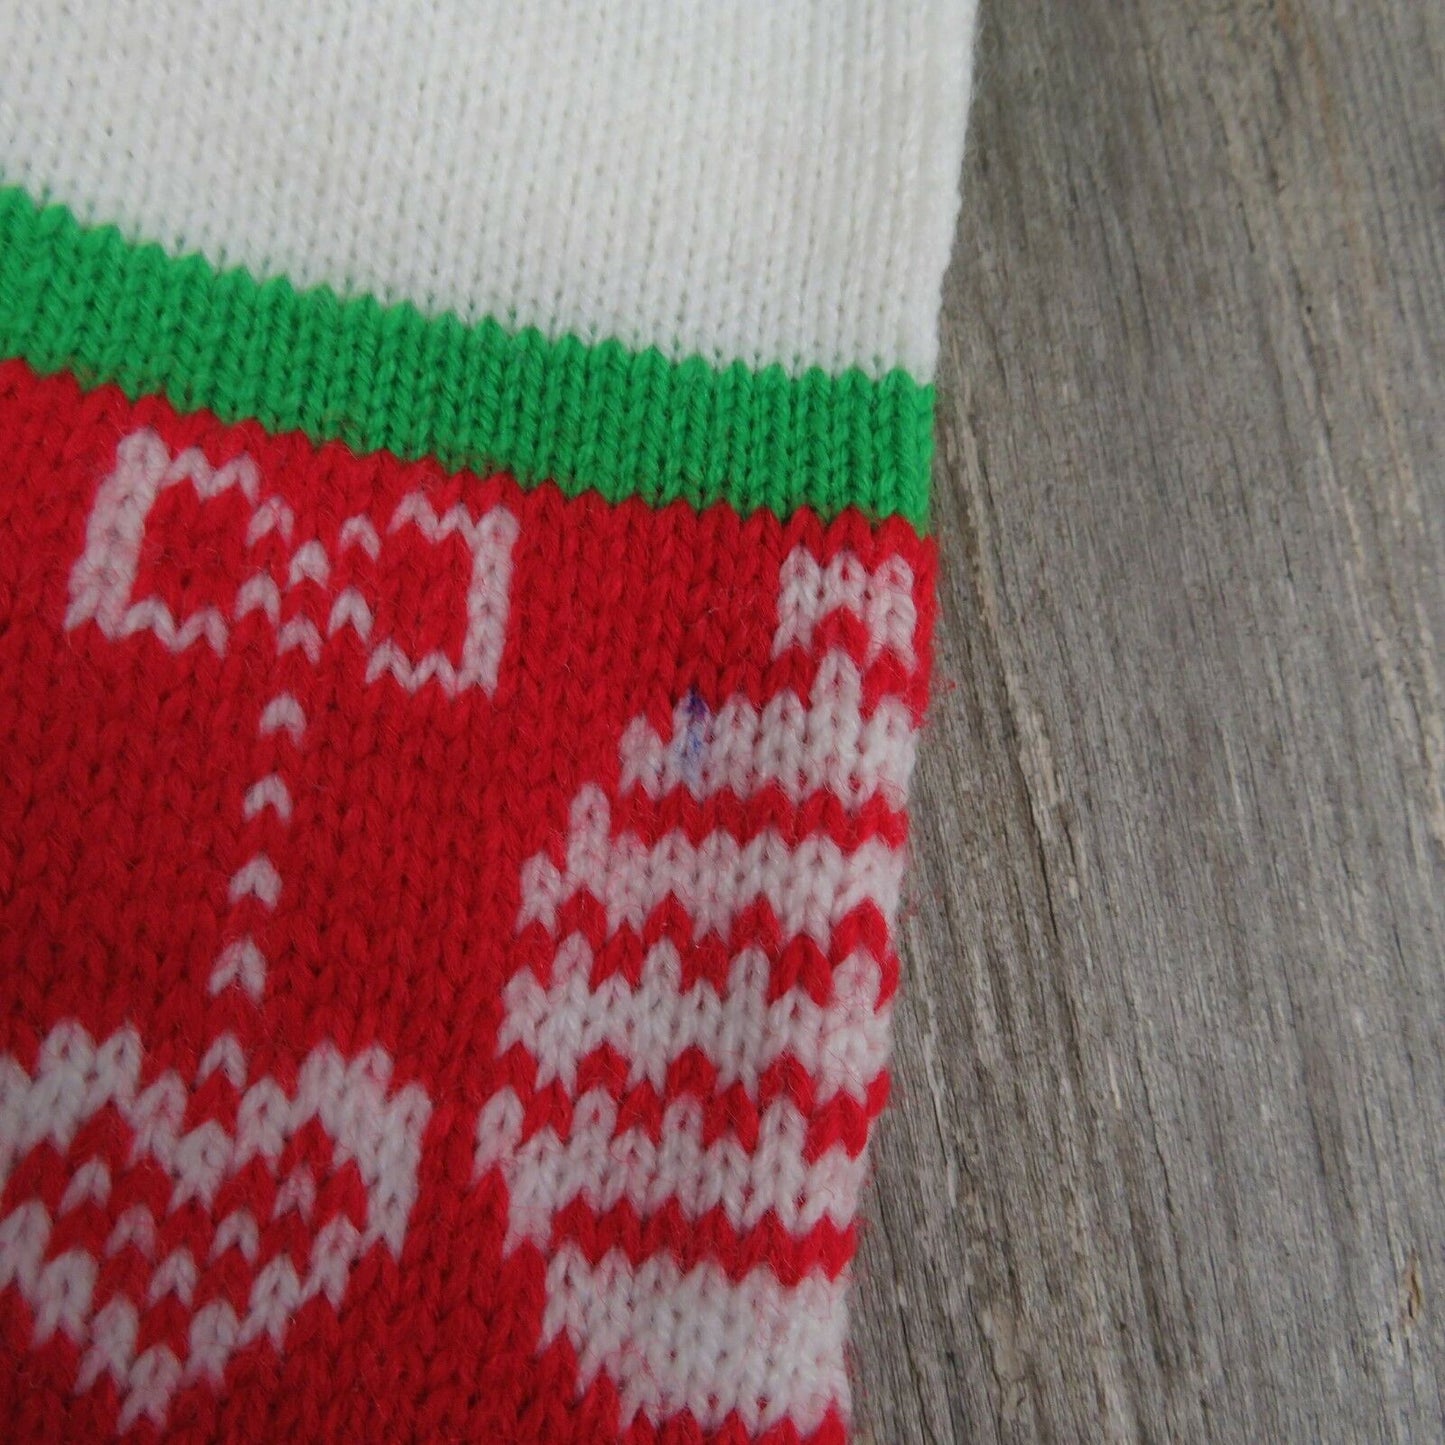 Vintage Christmas Stocking Ornaments Hearts Knitted Knit Green Red Large ST37 - At Grandma's Table